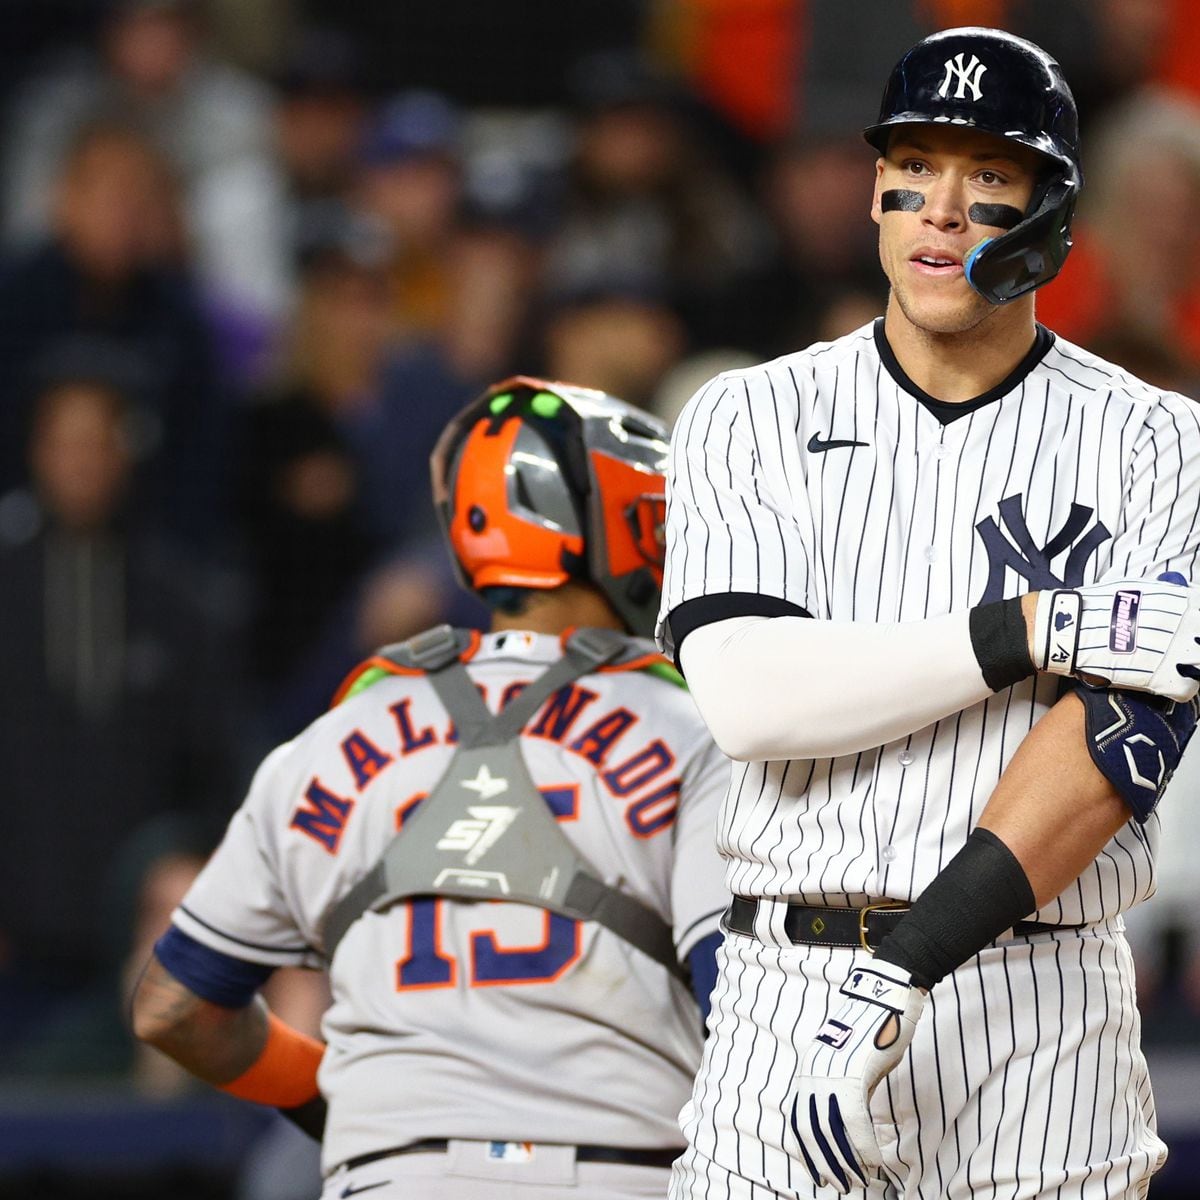 Yankees: Aaron Judge's contract expectations are downright delusional